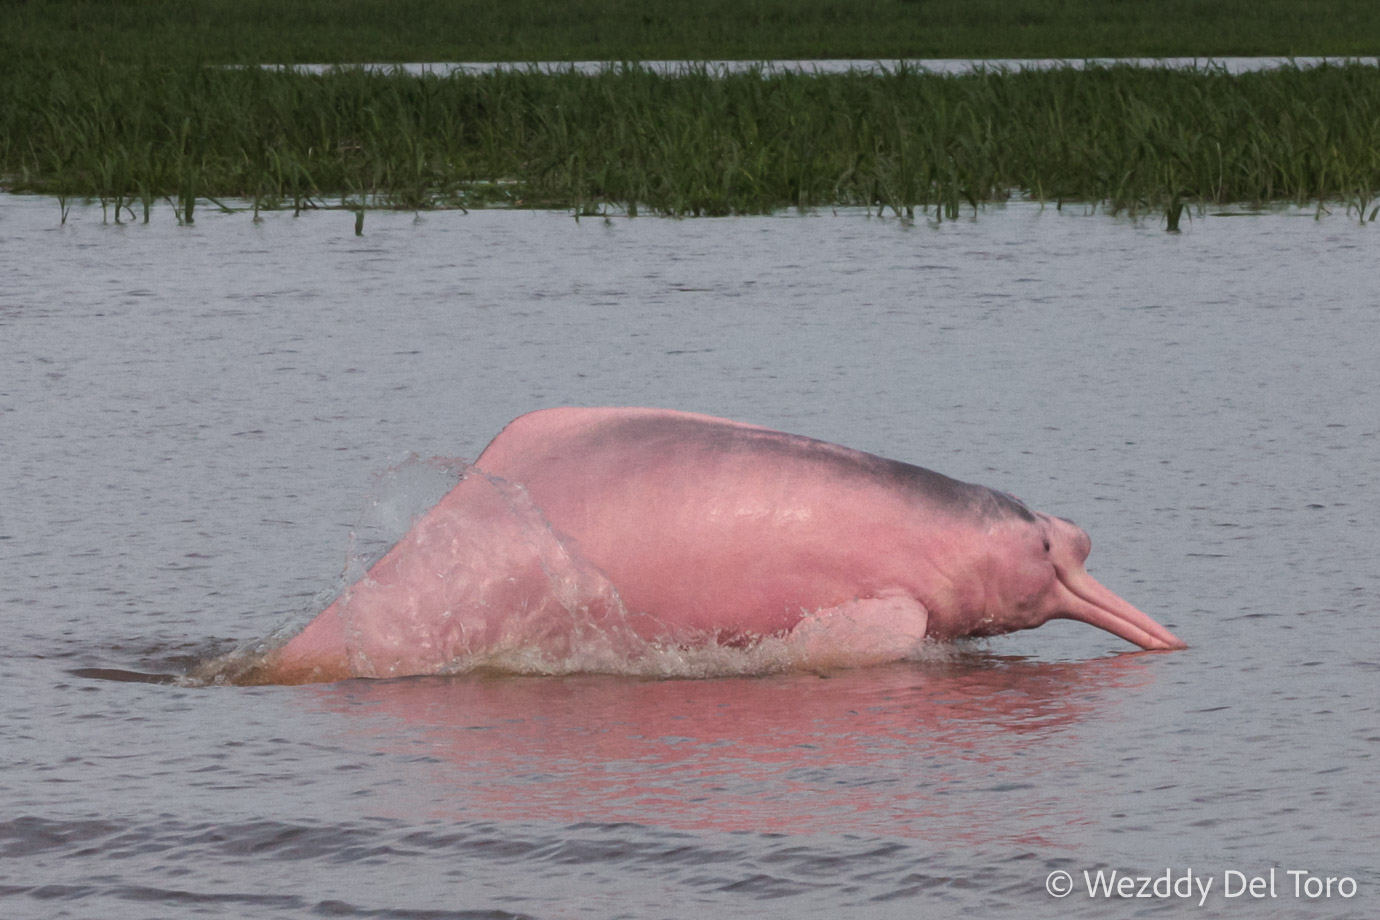 An Amazon river dolphin, also known as “pink river dolphin” (“boto vermelho”, Inia geoffrensis-Cetacea: Iniidae). This species doesn’t usually leap above the water, so seeing them like this is rare. Most adult males and some females are predominantly pink, like the one seen in this photo.